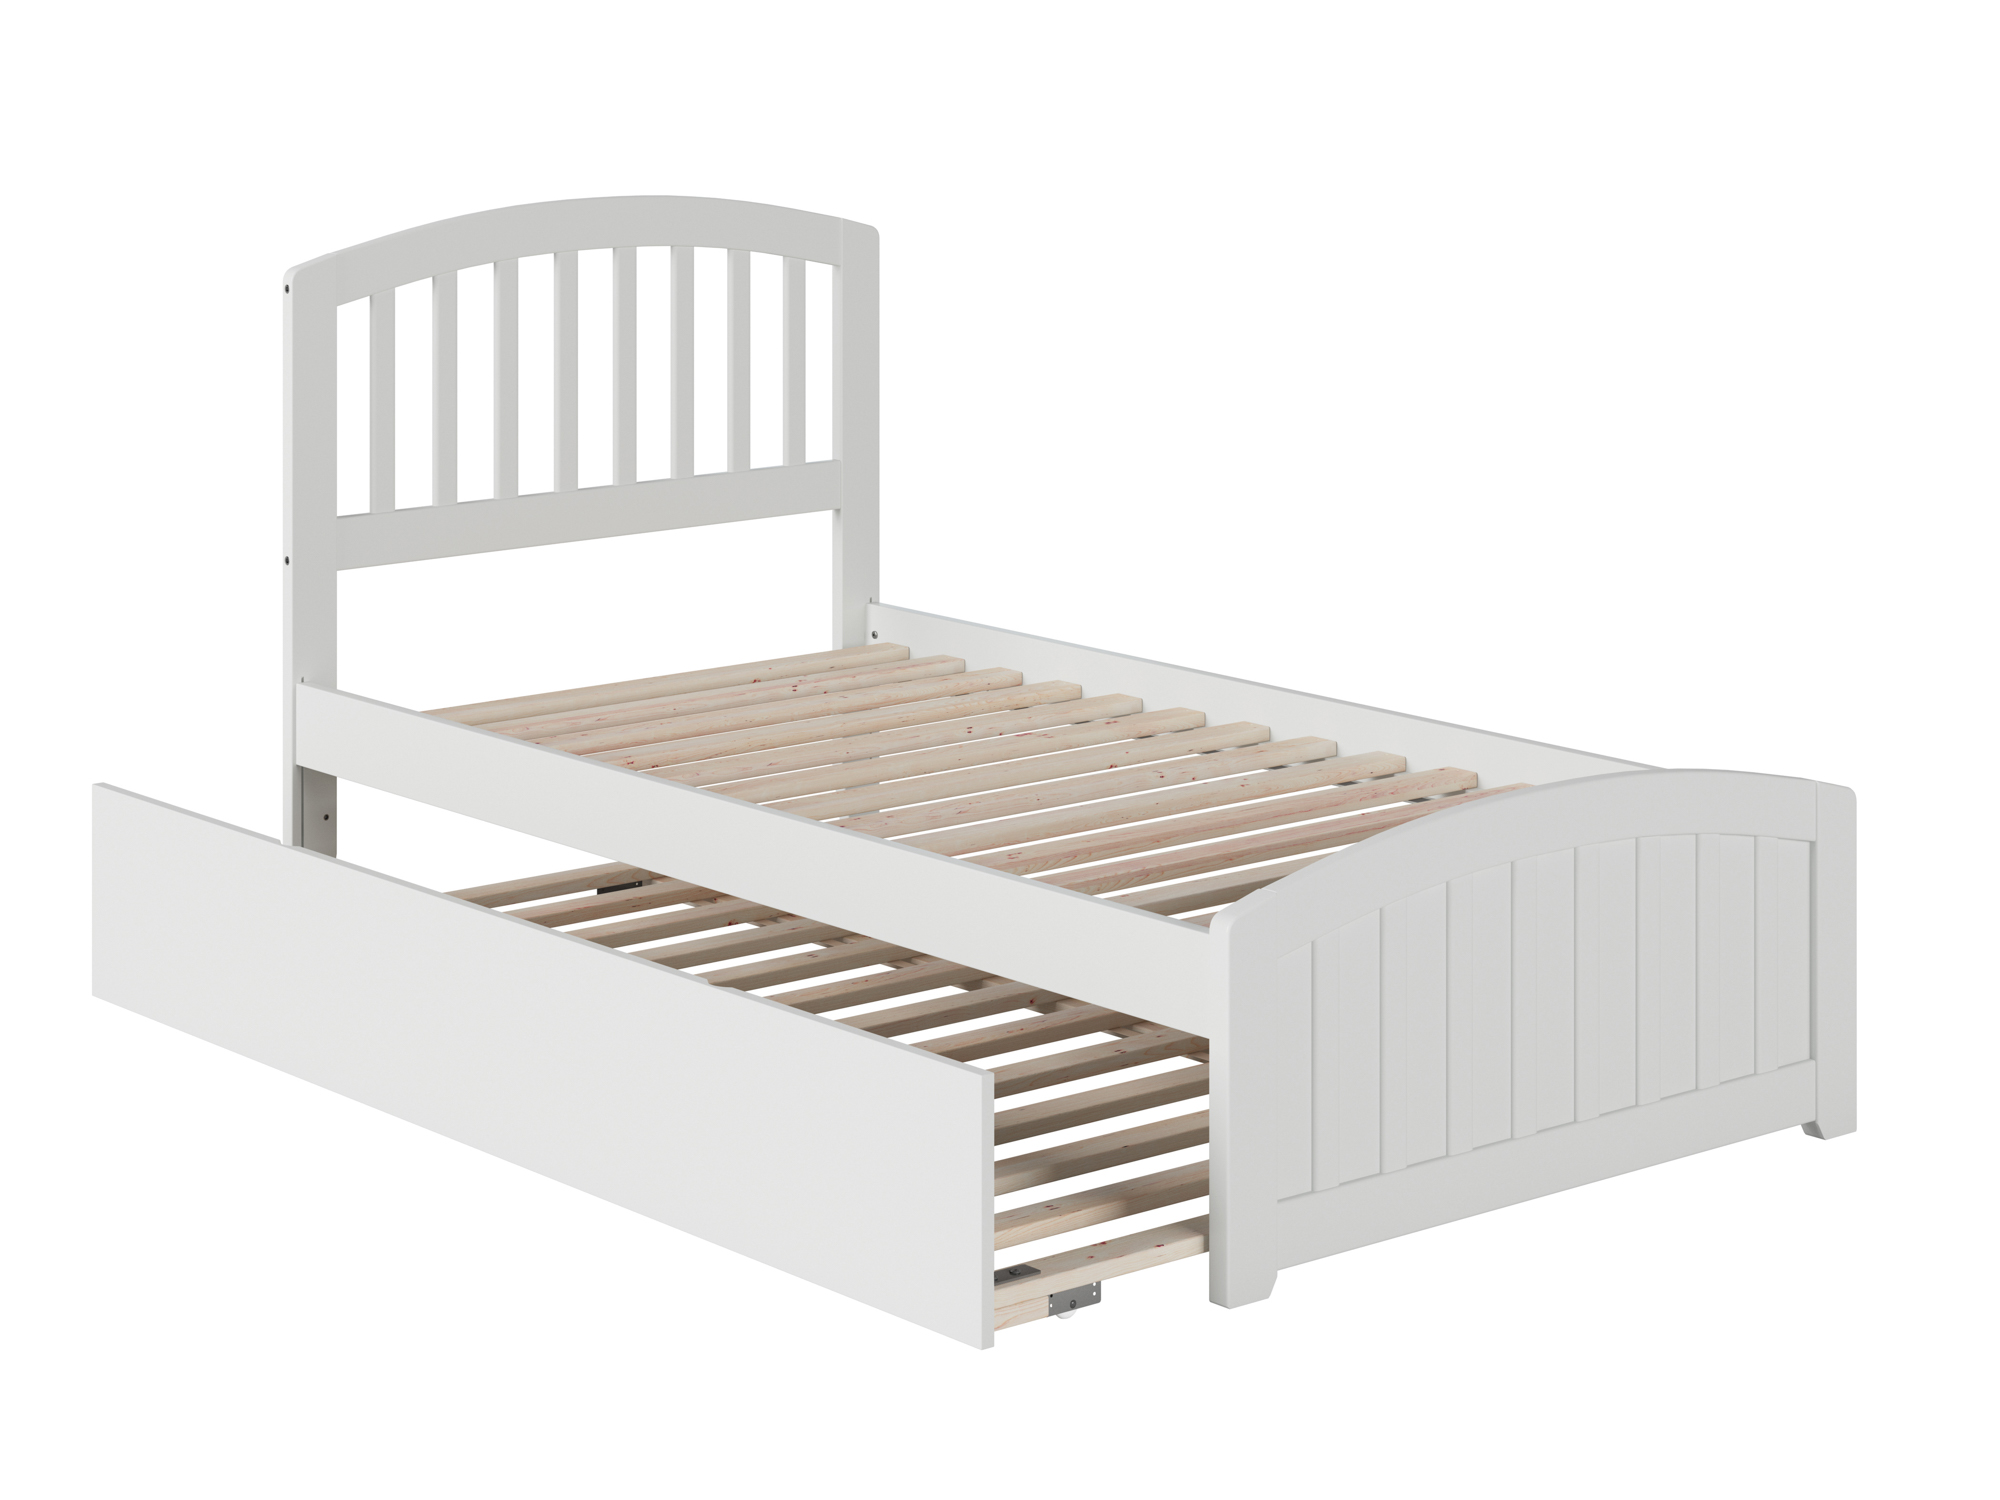 Richmond Twin Extra Long Bed with Matching Footboard and Twin Extra Long Trundle in White - image 5 of 6